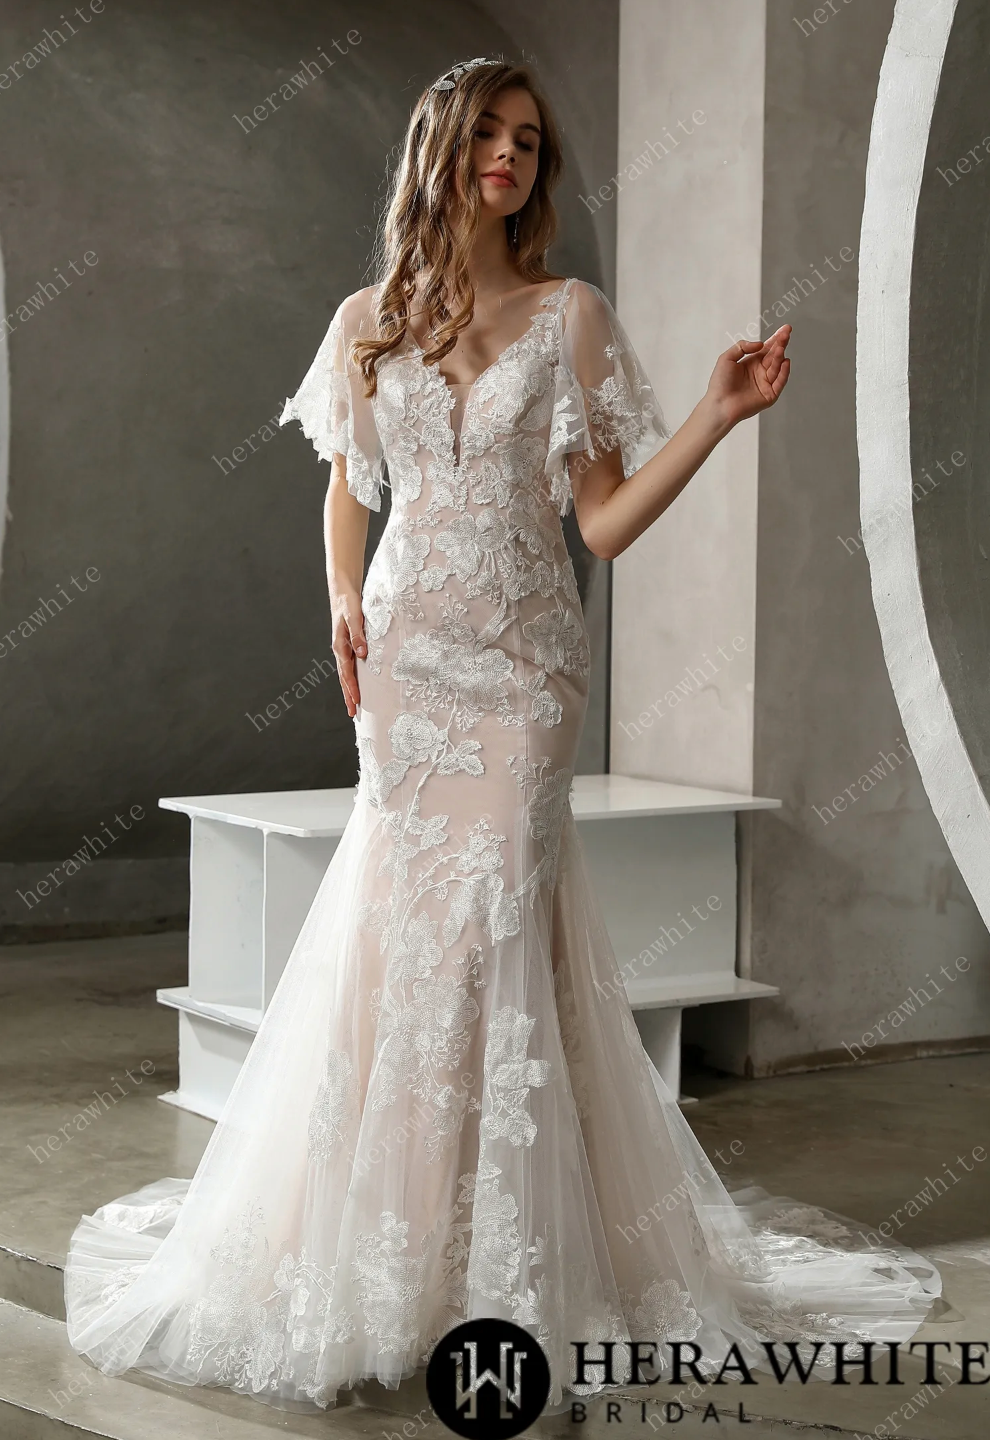 Floral Lace Plunging V-Neck Bridal Gown with Flutter Sleeves – TulleLux  Bridal Crowns & Accessories